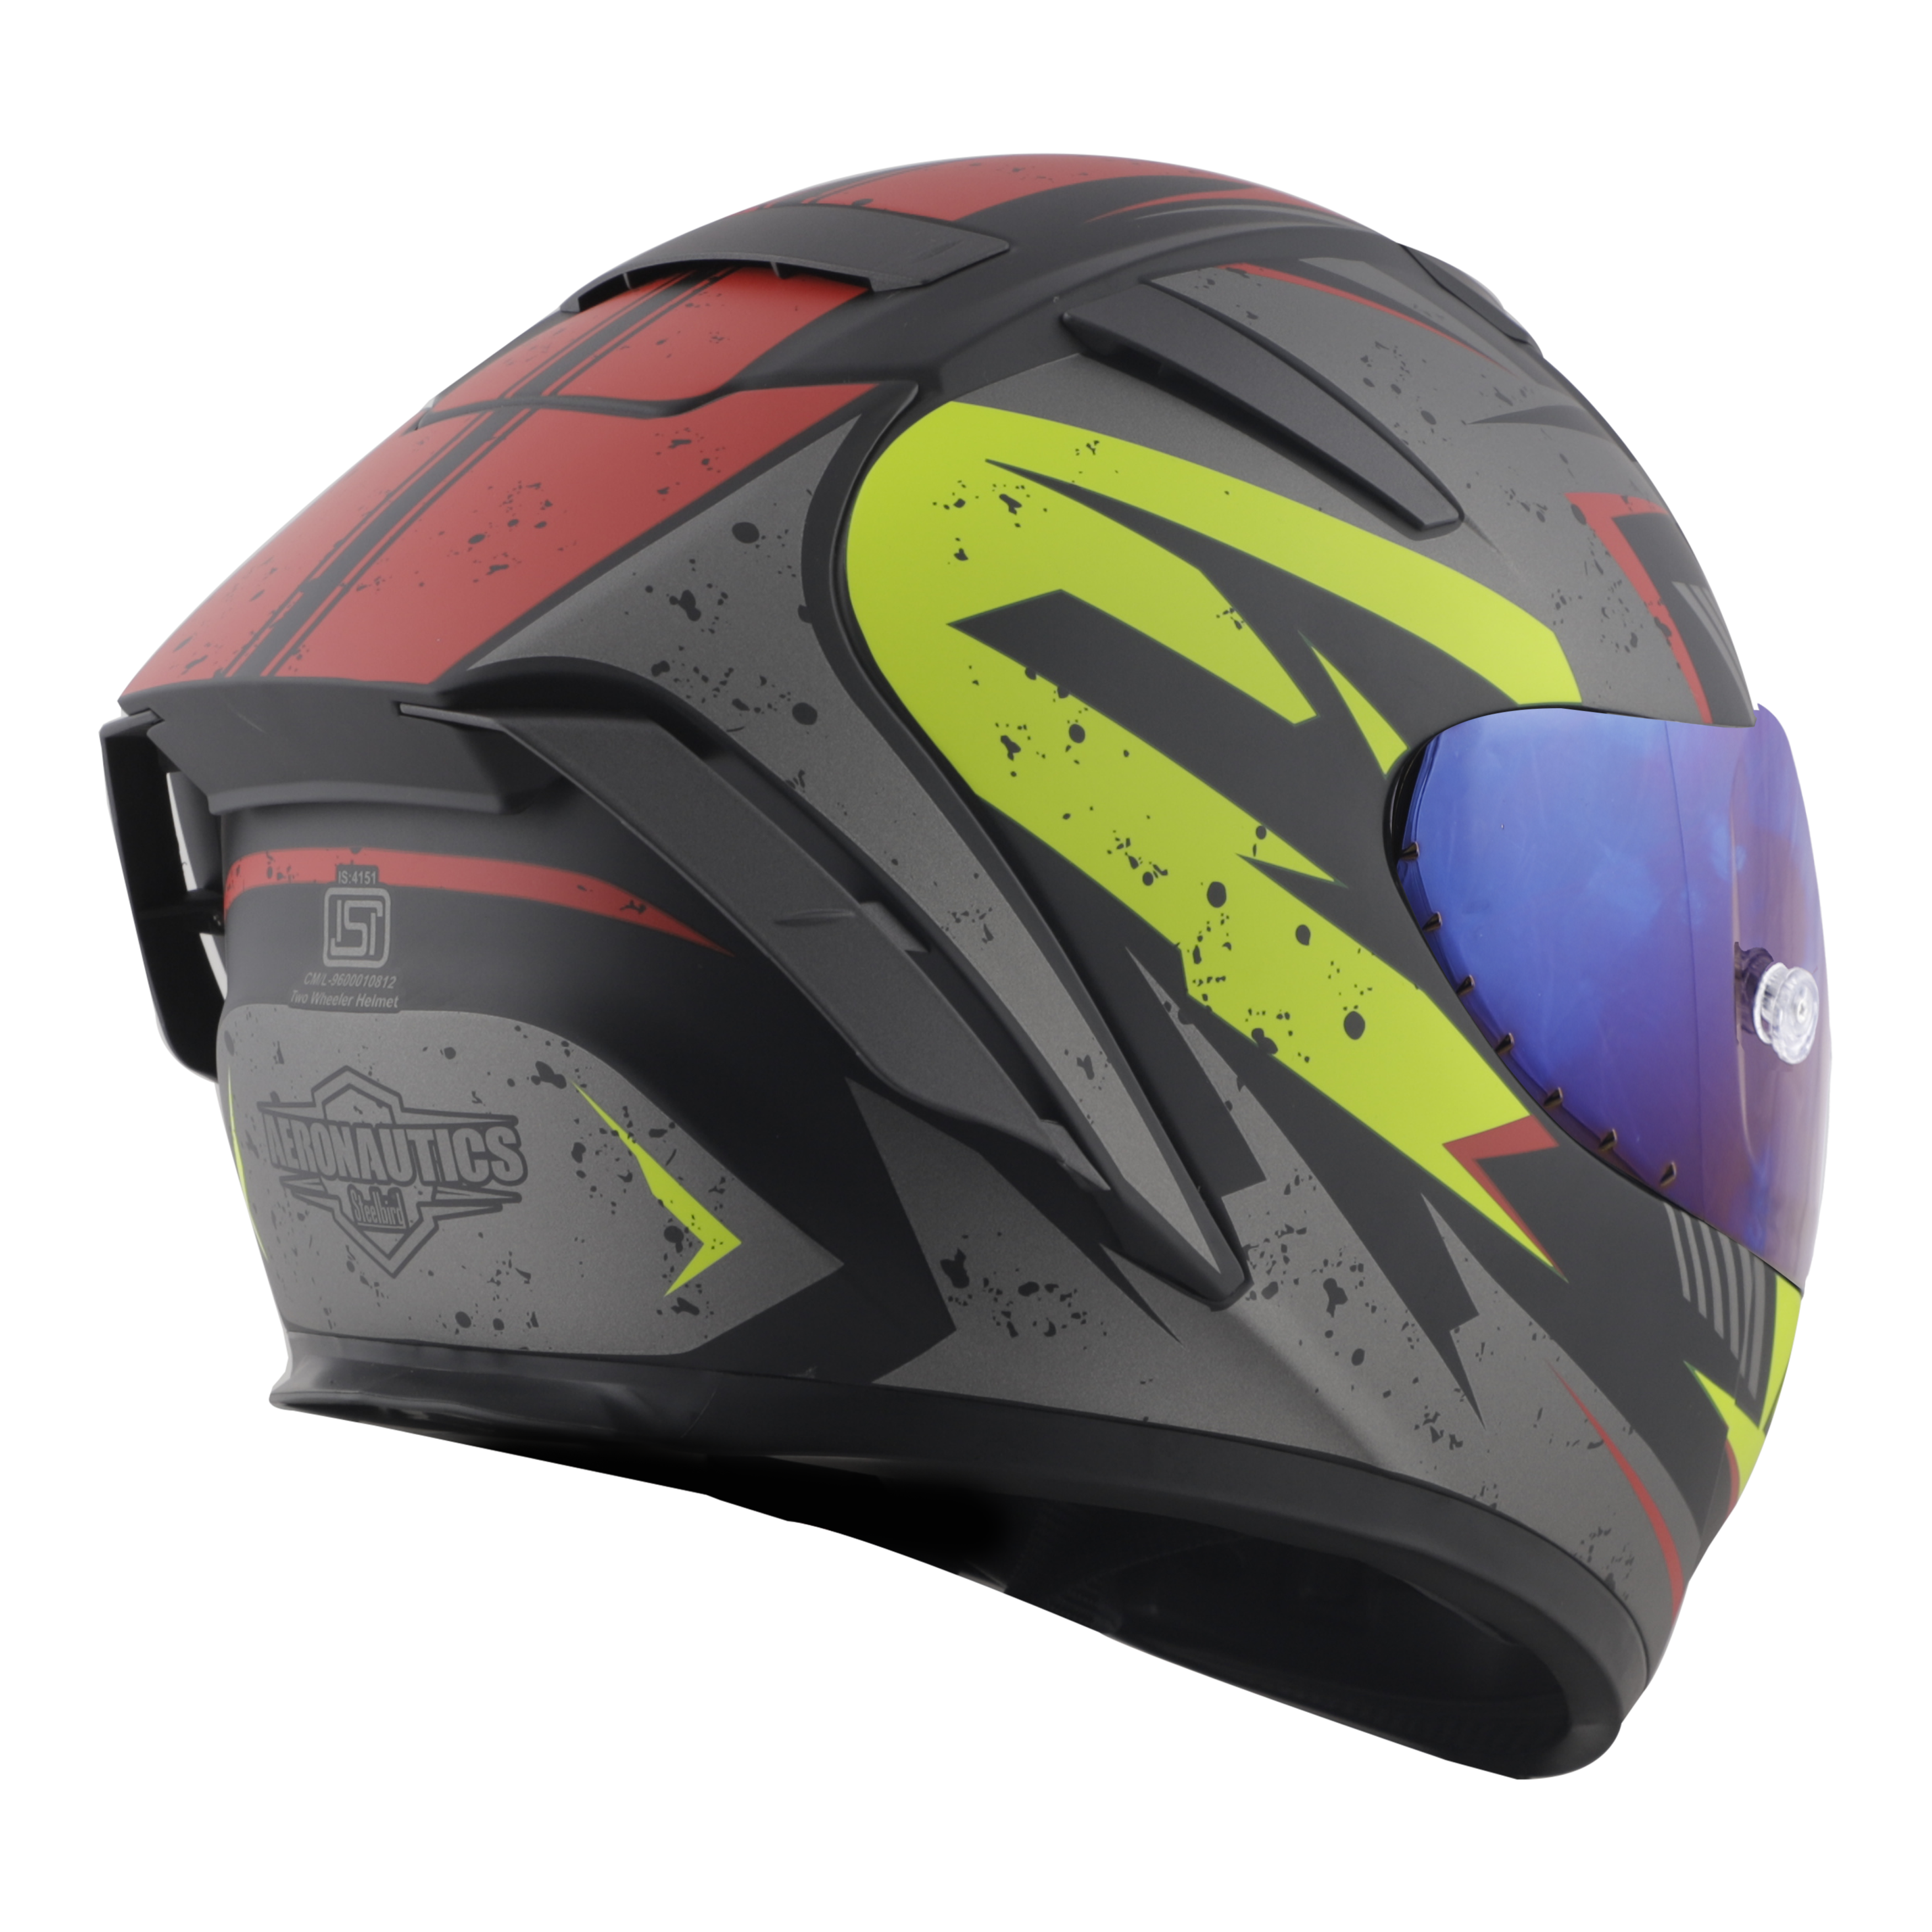 SA-2 BREEZER GLOSSY BLACK WITH GREY FITTED WITH CLEAR VISOR EXTRA CHROME BLUE VISOR FREE (WITH ANTI-FOG SHIELD HOLDER)